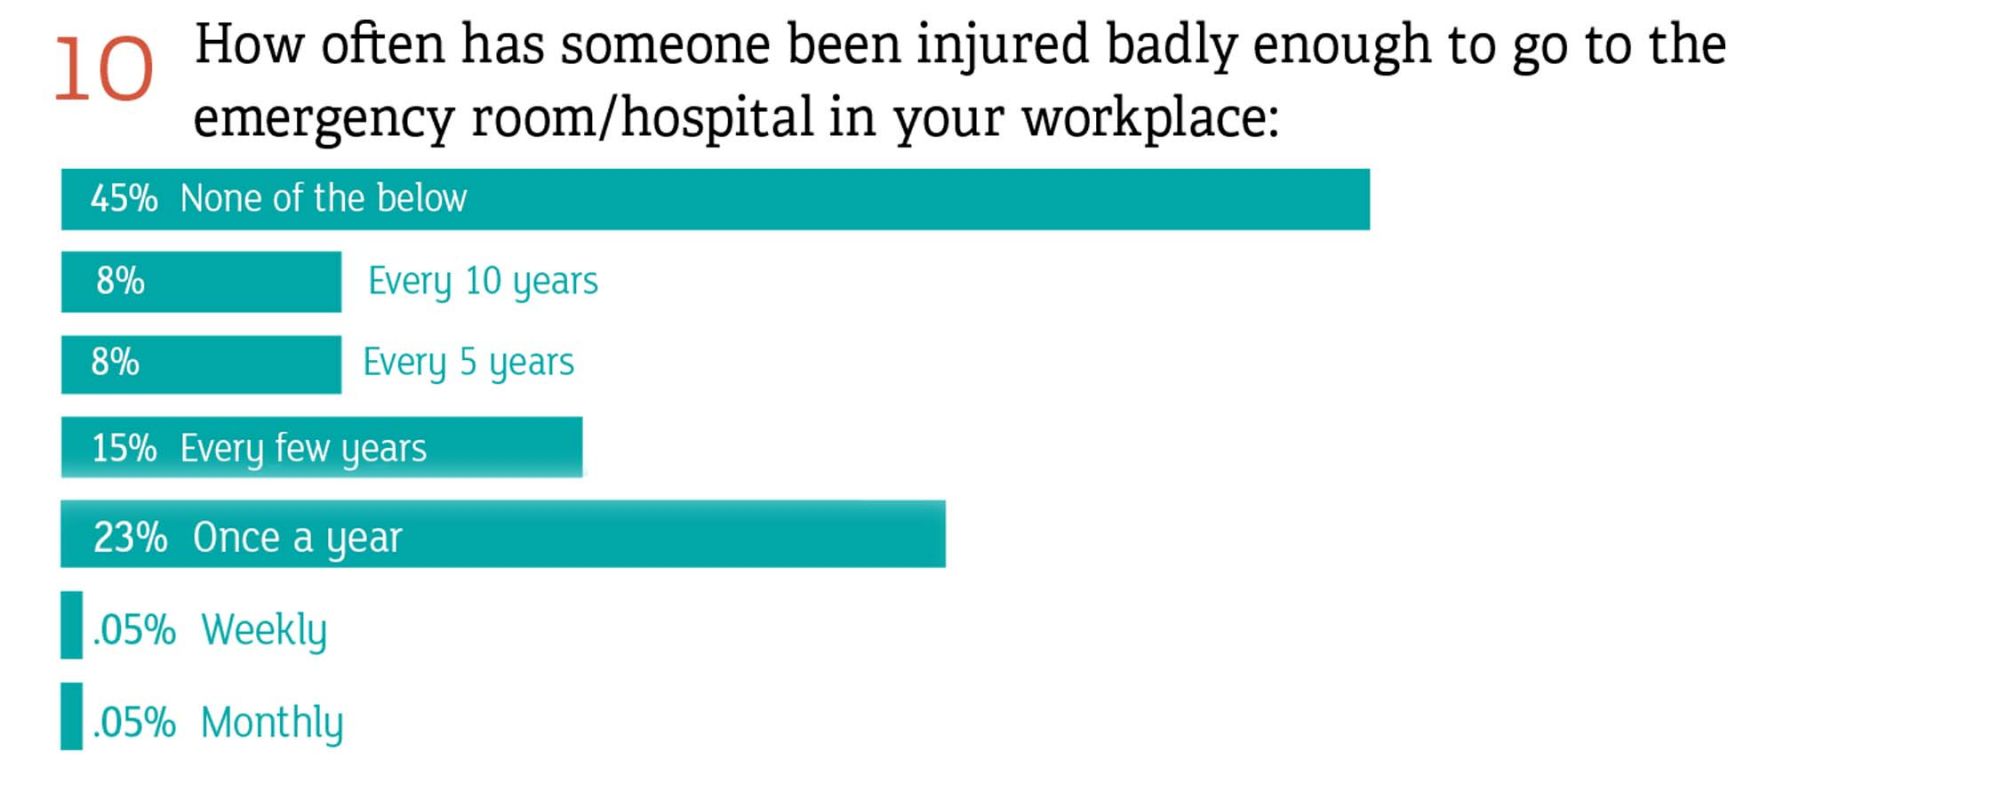 How often has someone been injured badly enough to go to the emergency room/hospital in your workplace?